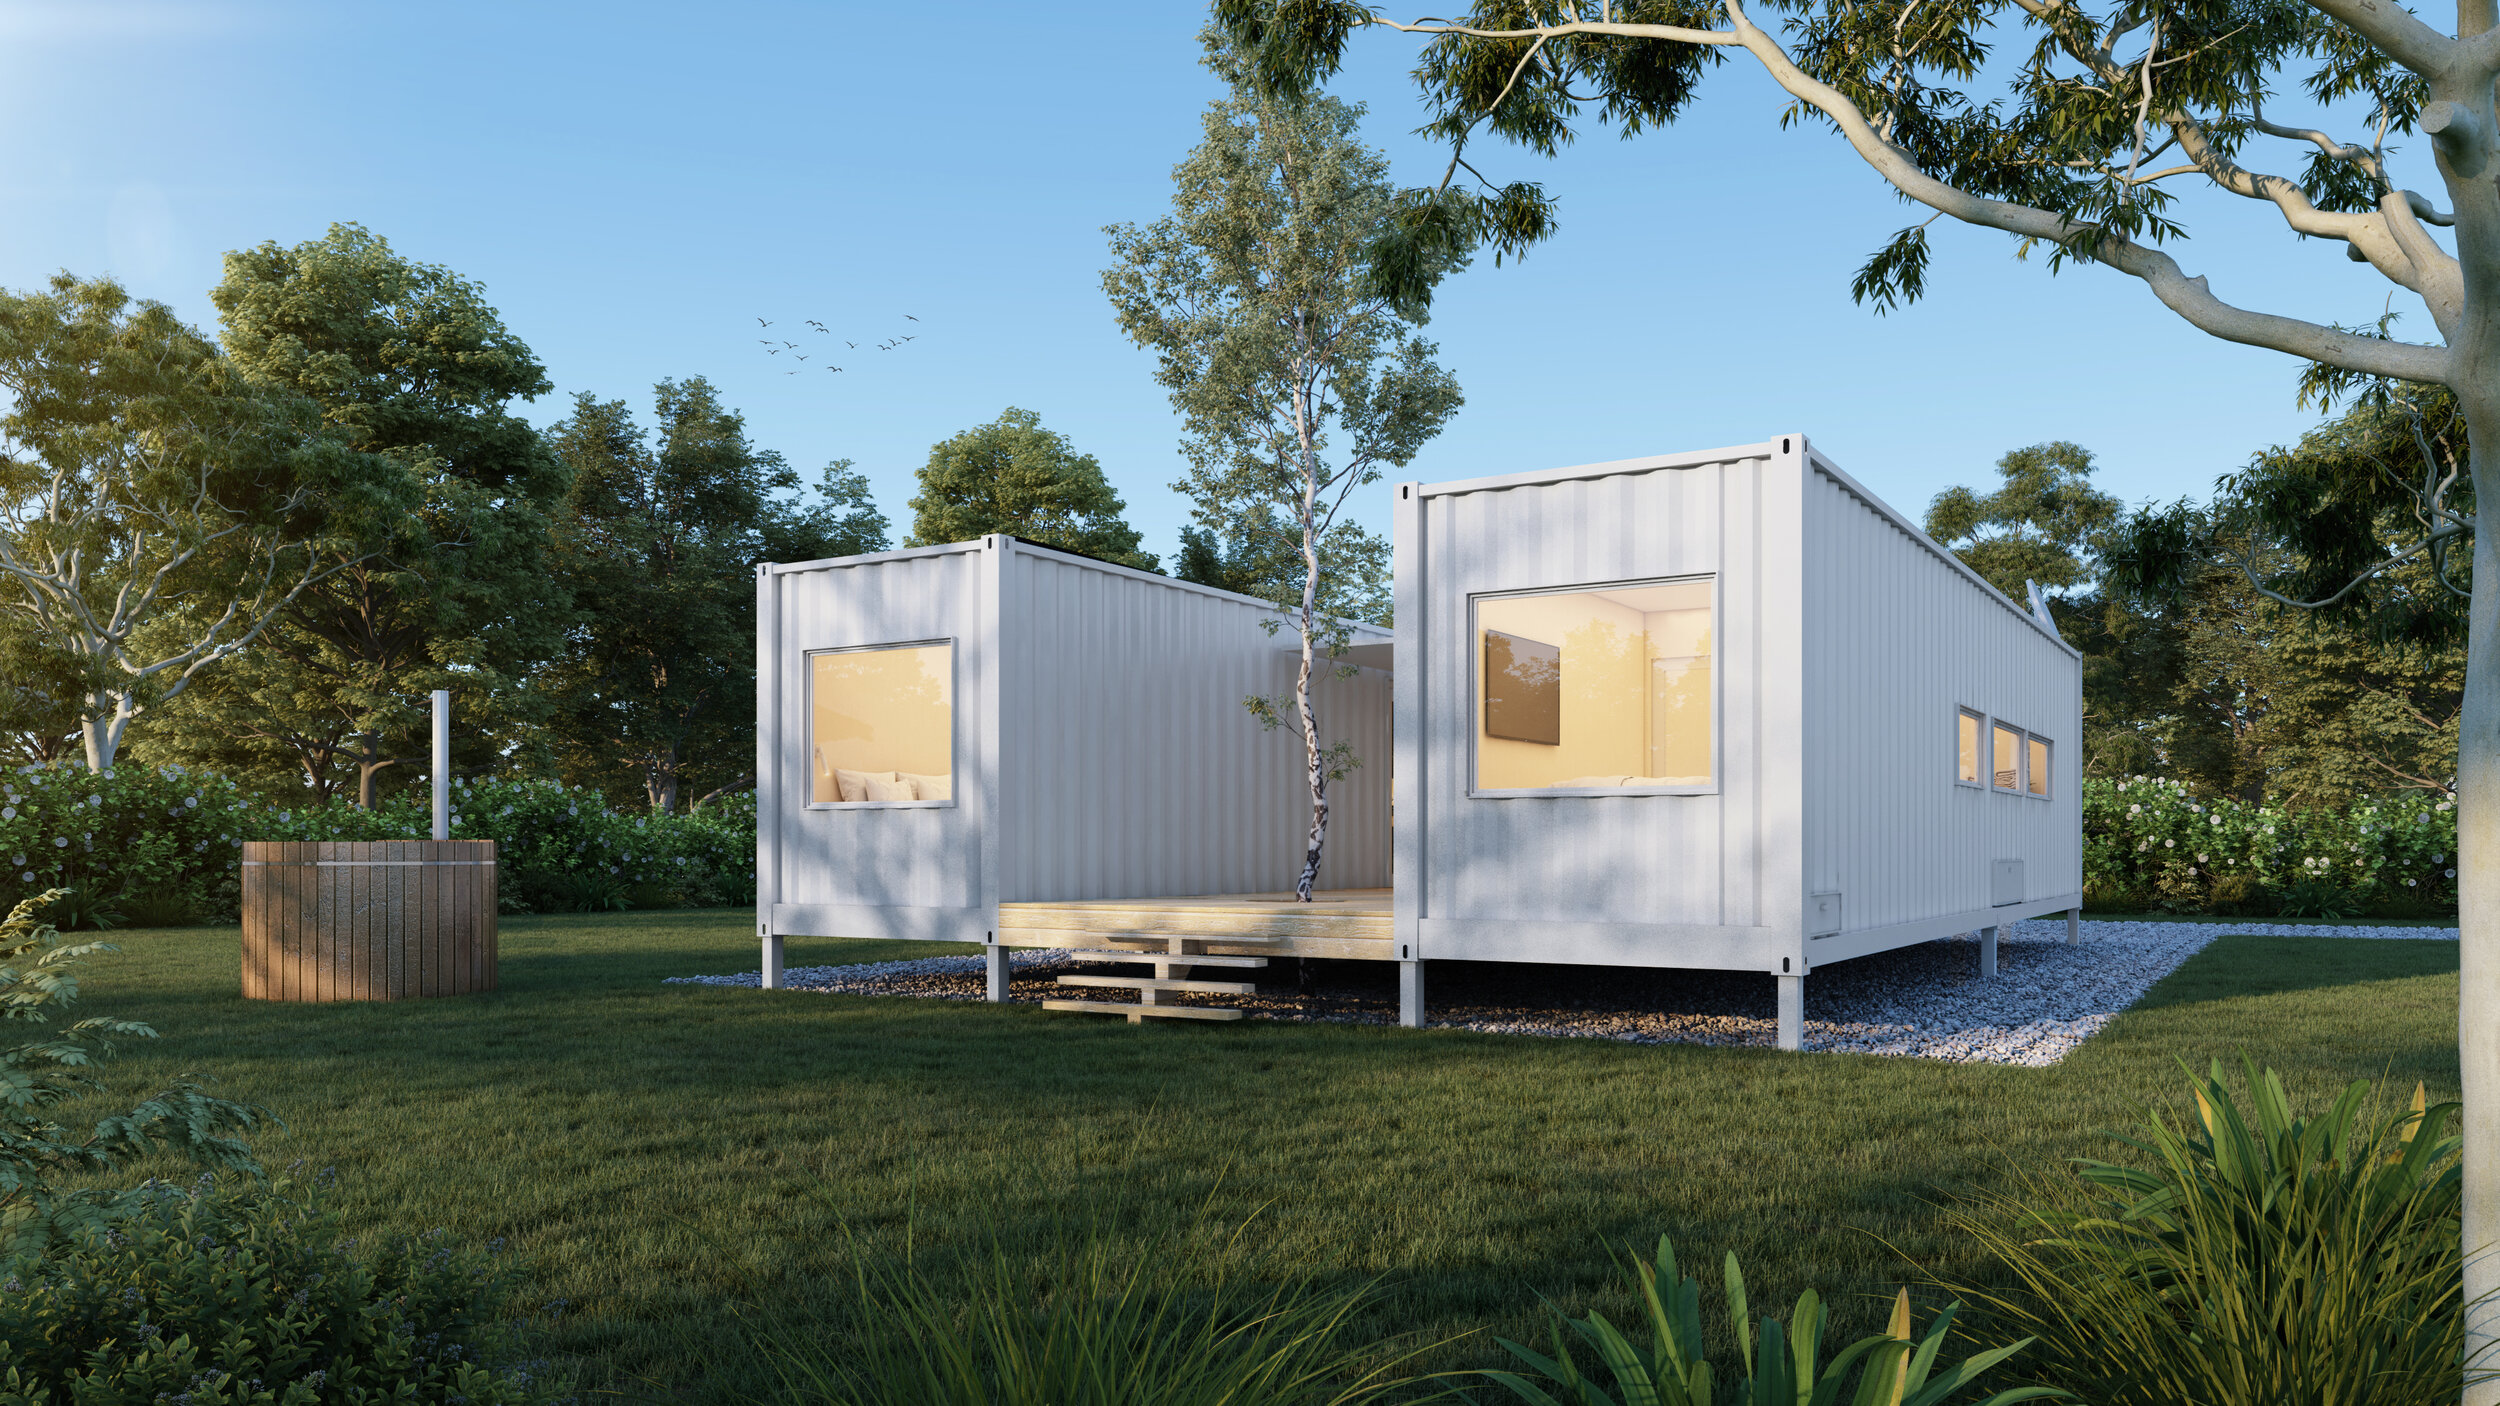 4 Bedroom Container Home_White_Hi-Res.jpg